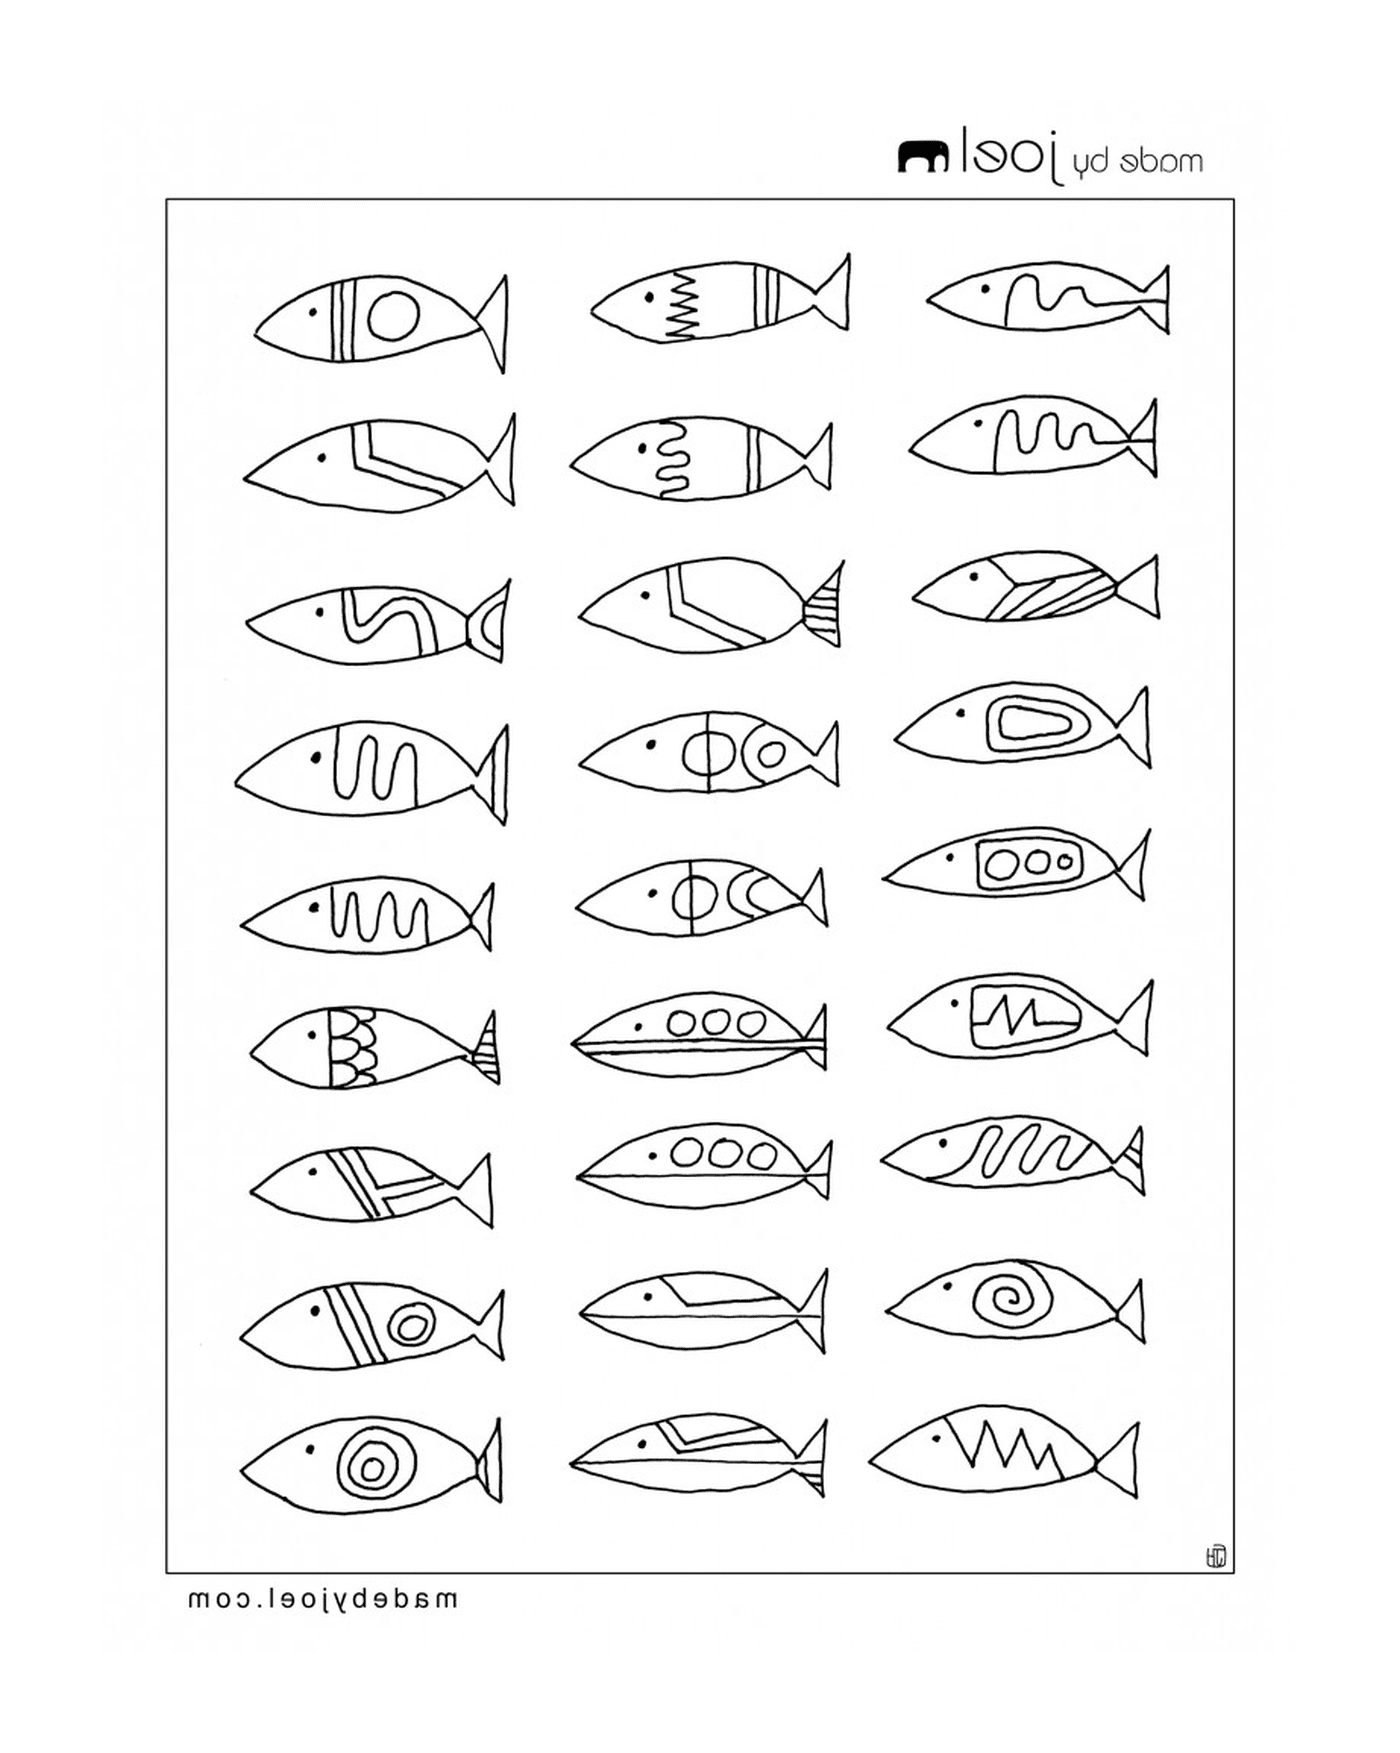  Different types of fish on this page 